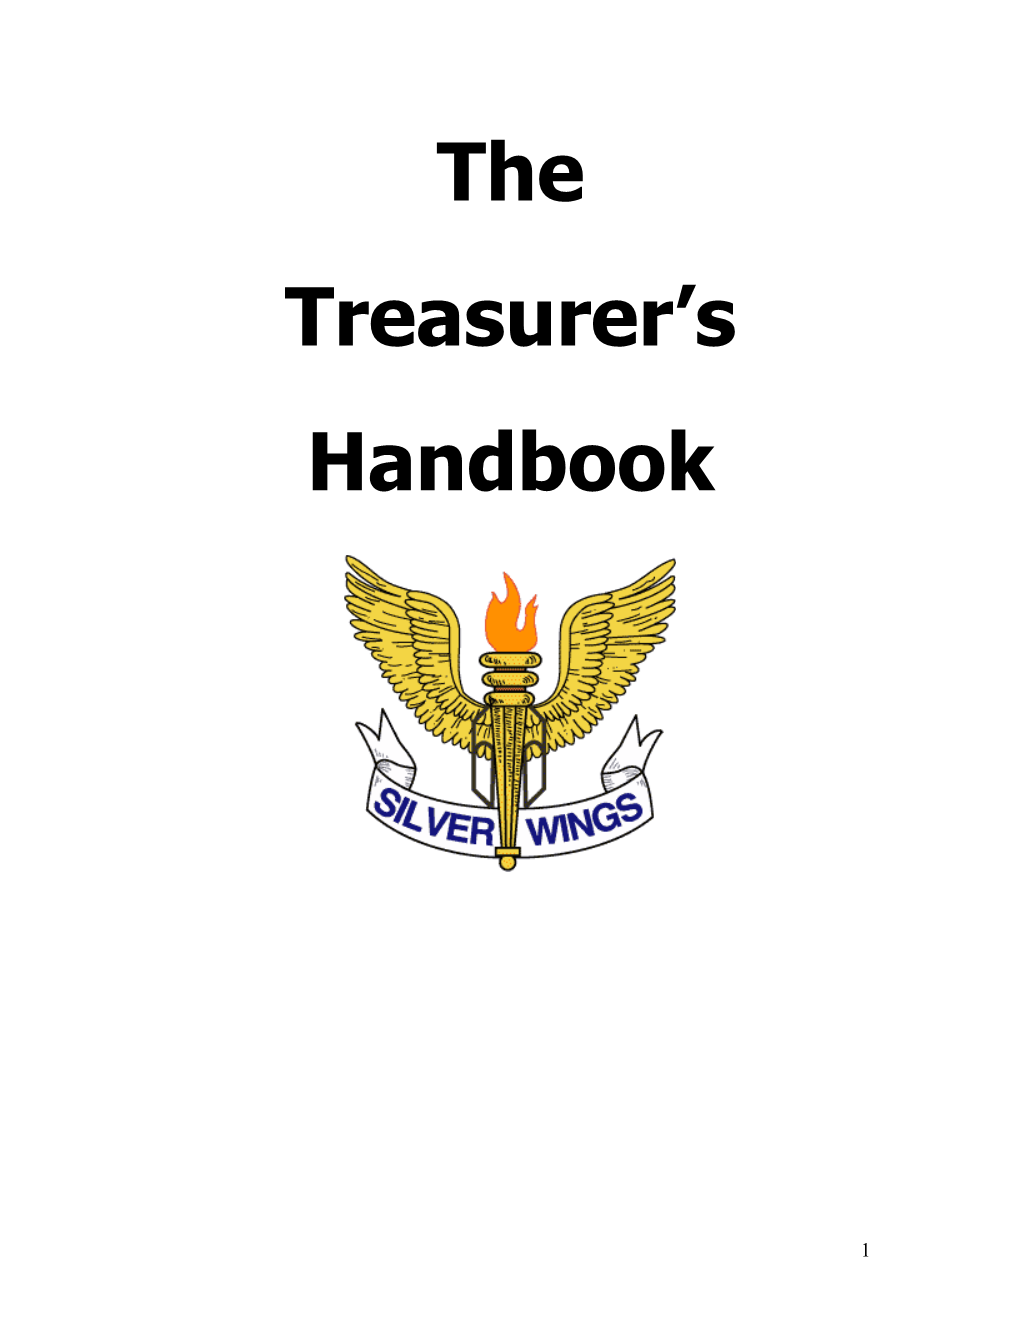 Although There Is a Lot of Work That Goes Into Being a Silver Wings Treasurer, with The